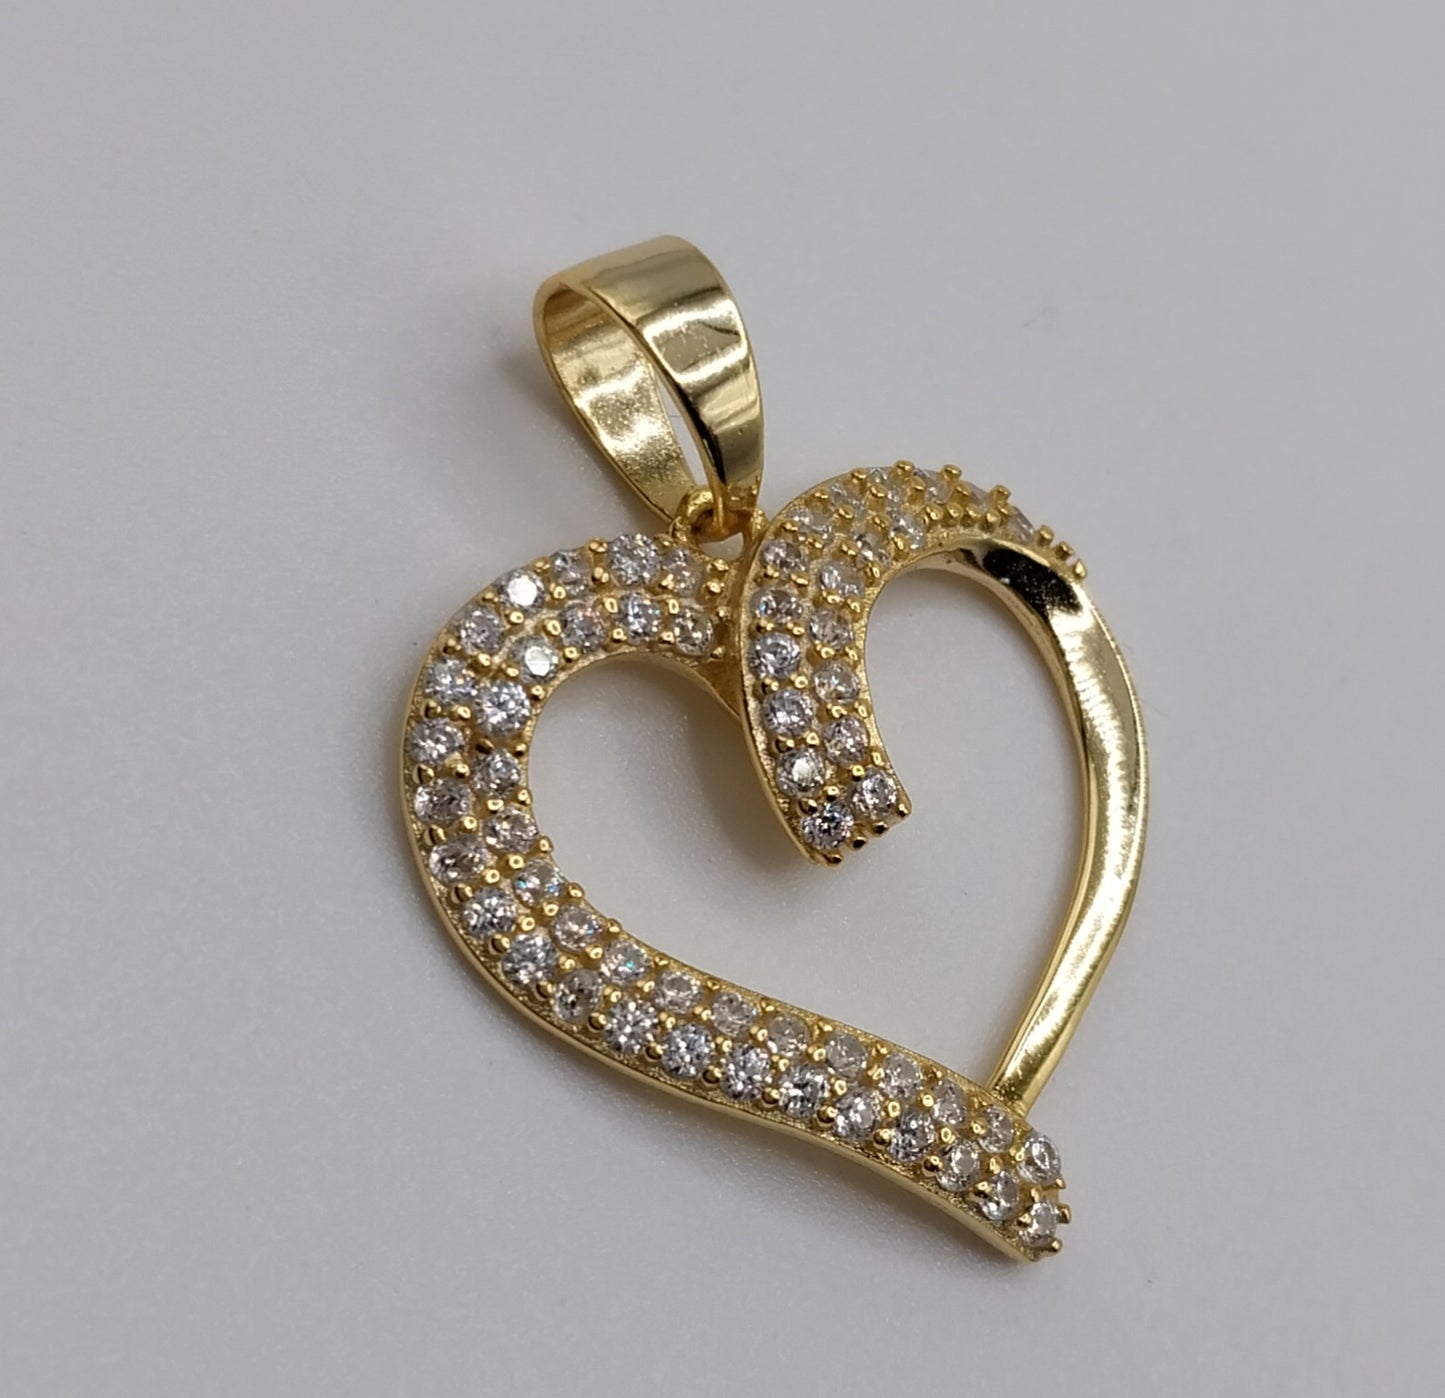 Gold Plated Silver 925 Heart Pendant with Cubic Zirconia Stones